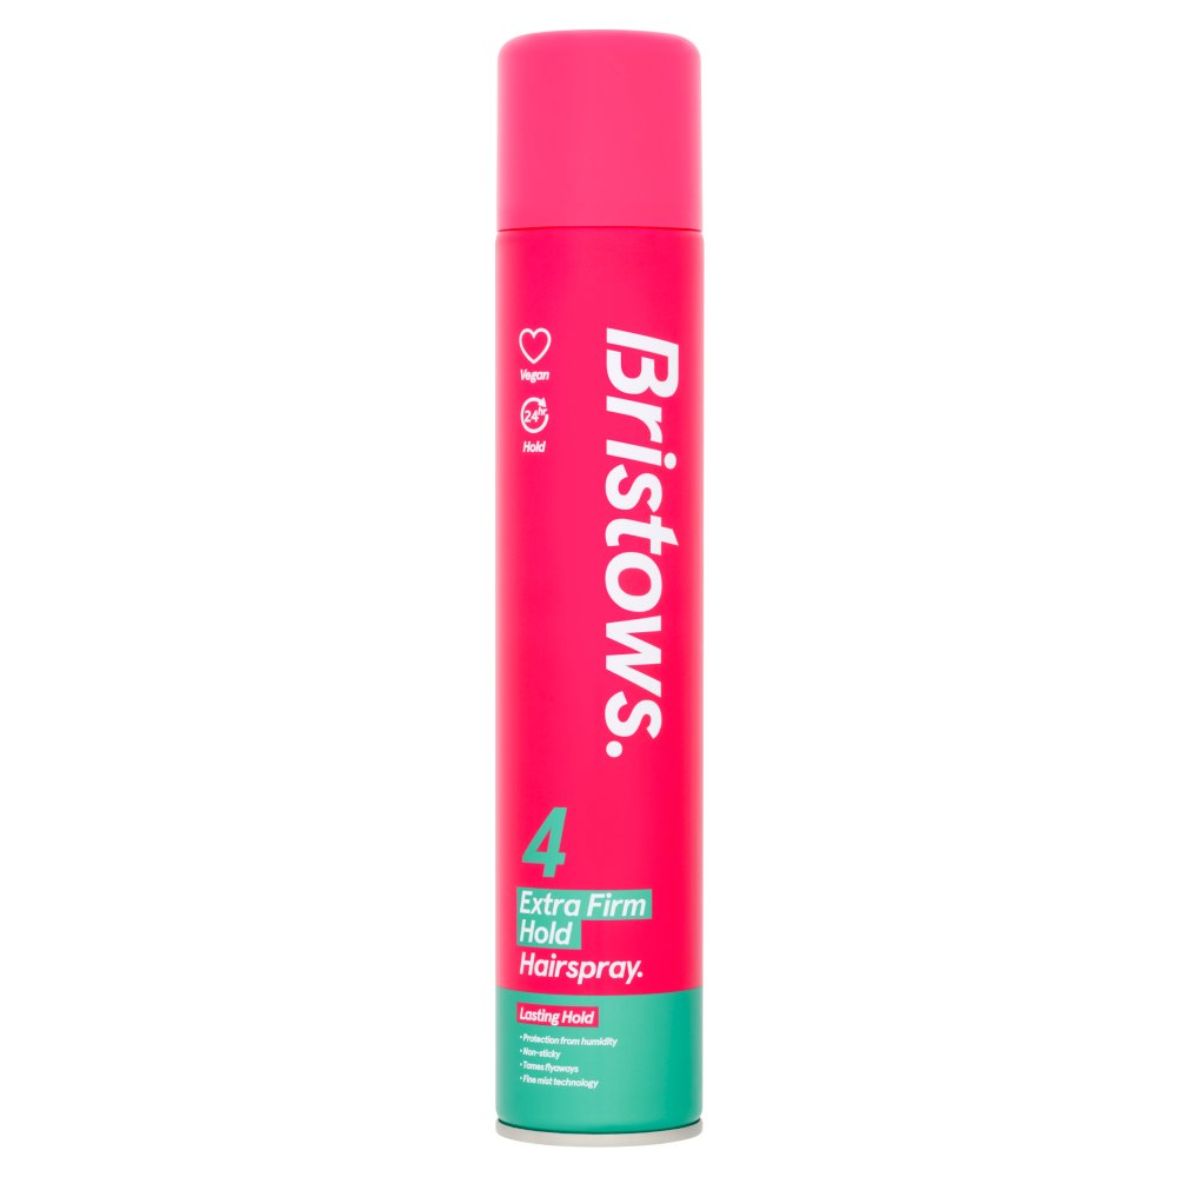 A Bristows - 4 Extra Firm Hold Hairspray - 400ml, on a white background.